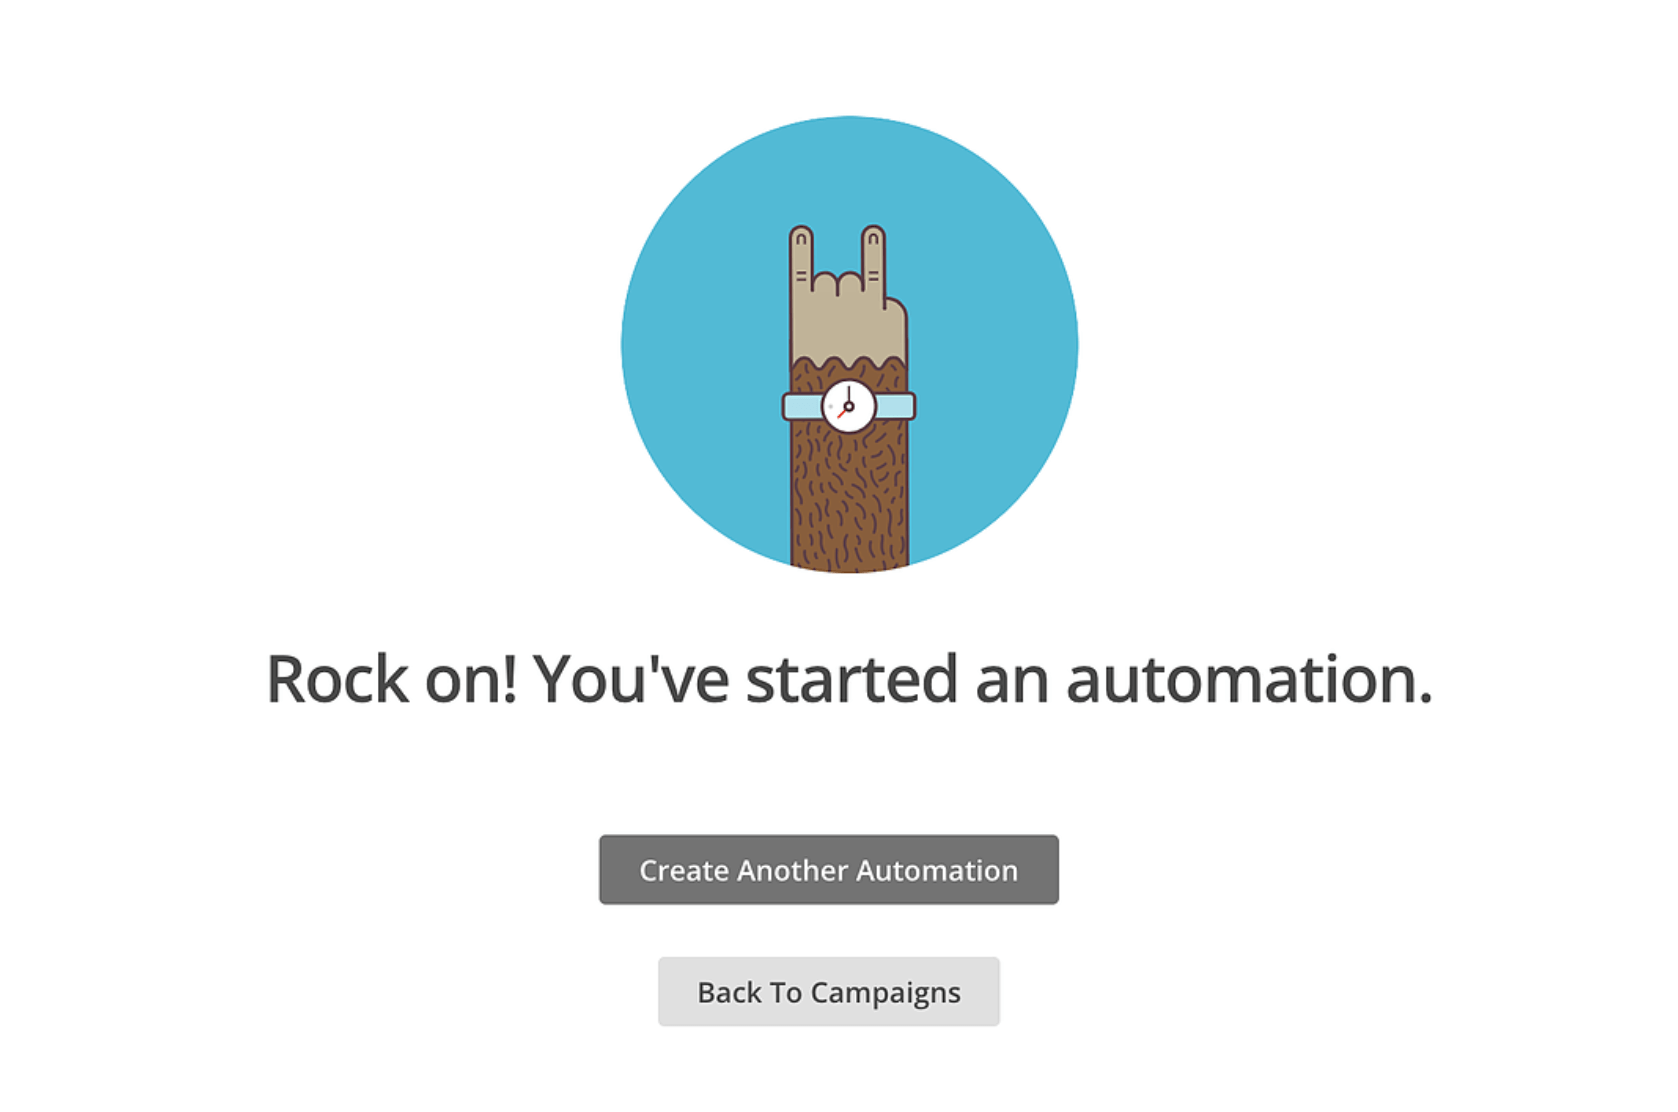 "Rock on! You've started and automation" UX writing example